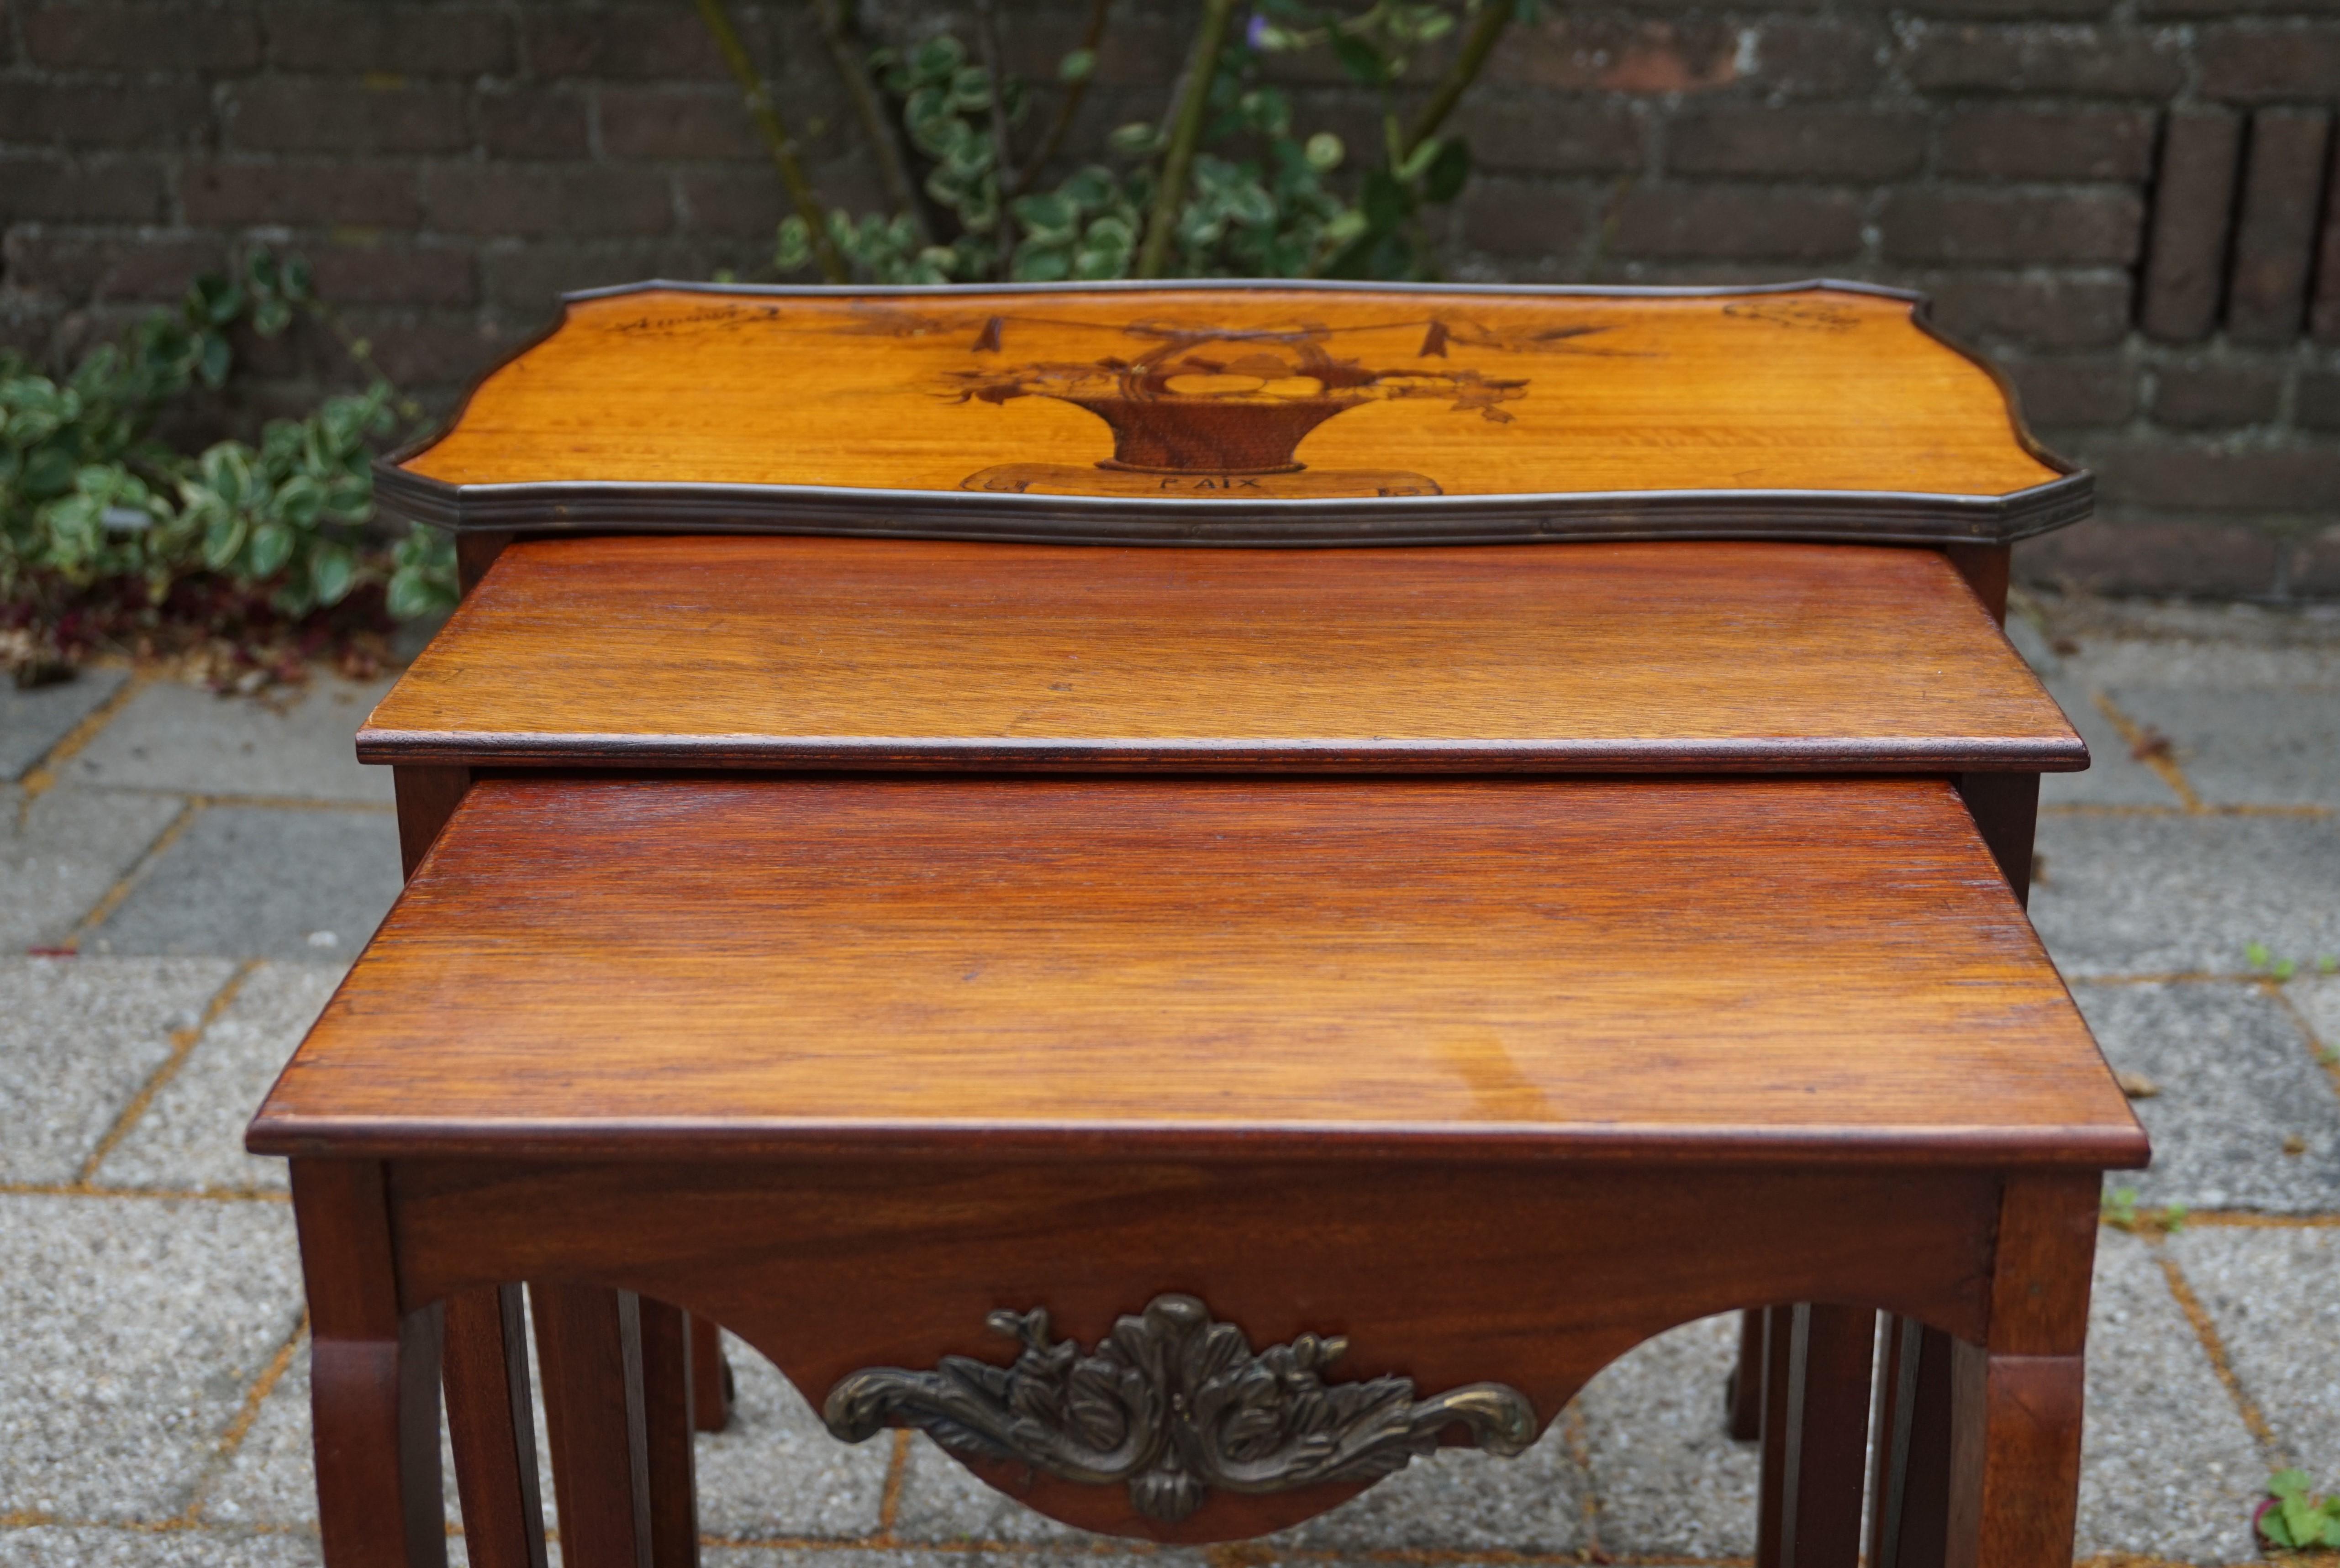 Unique set of stacking tables with marvelous inlay and maker's mark.

This marvelously handcrafted set of 3 tables from the early 1900s has the most elegant shape and patina. The tabletop of the largest table is made of satinwood and the message is